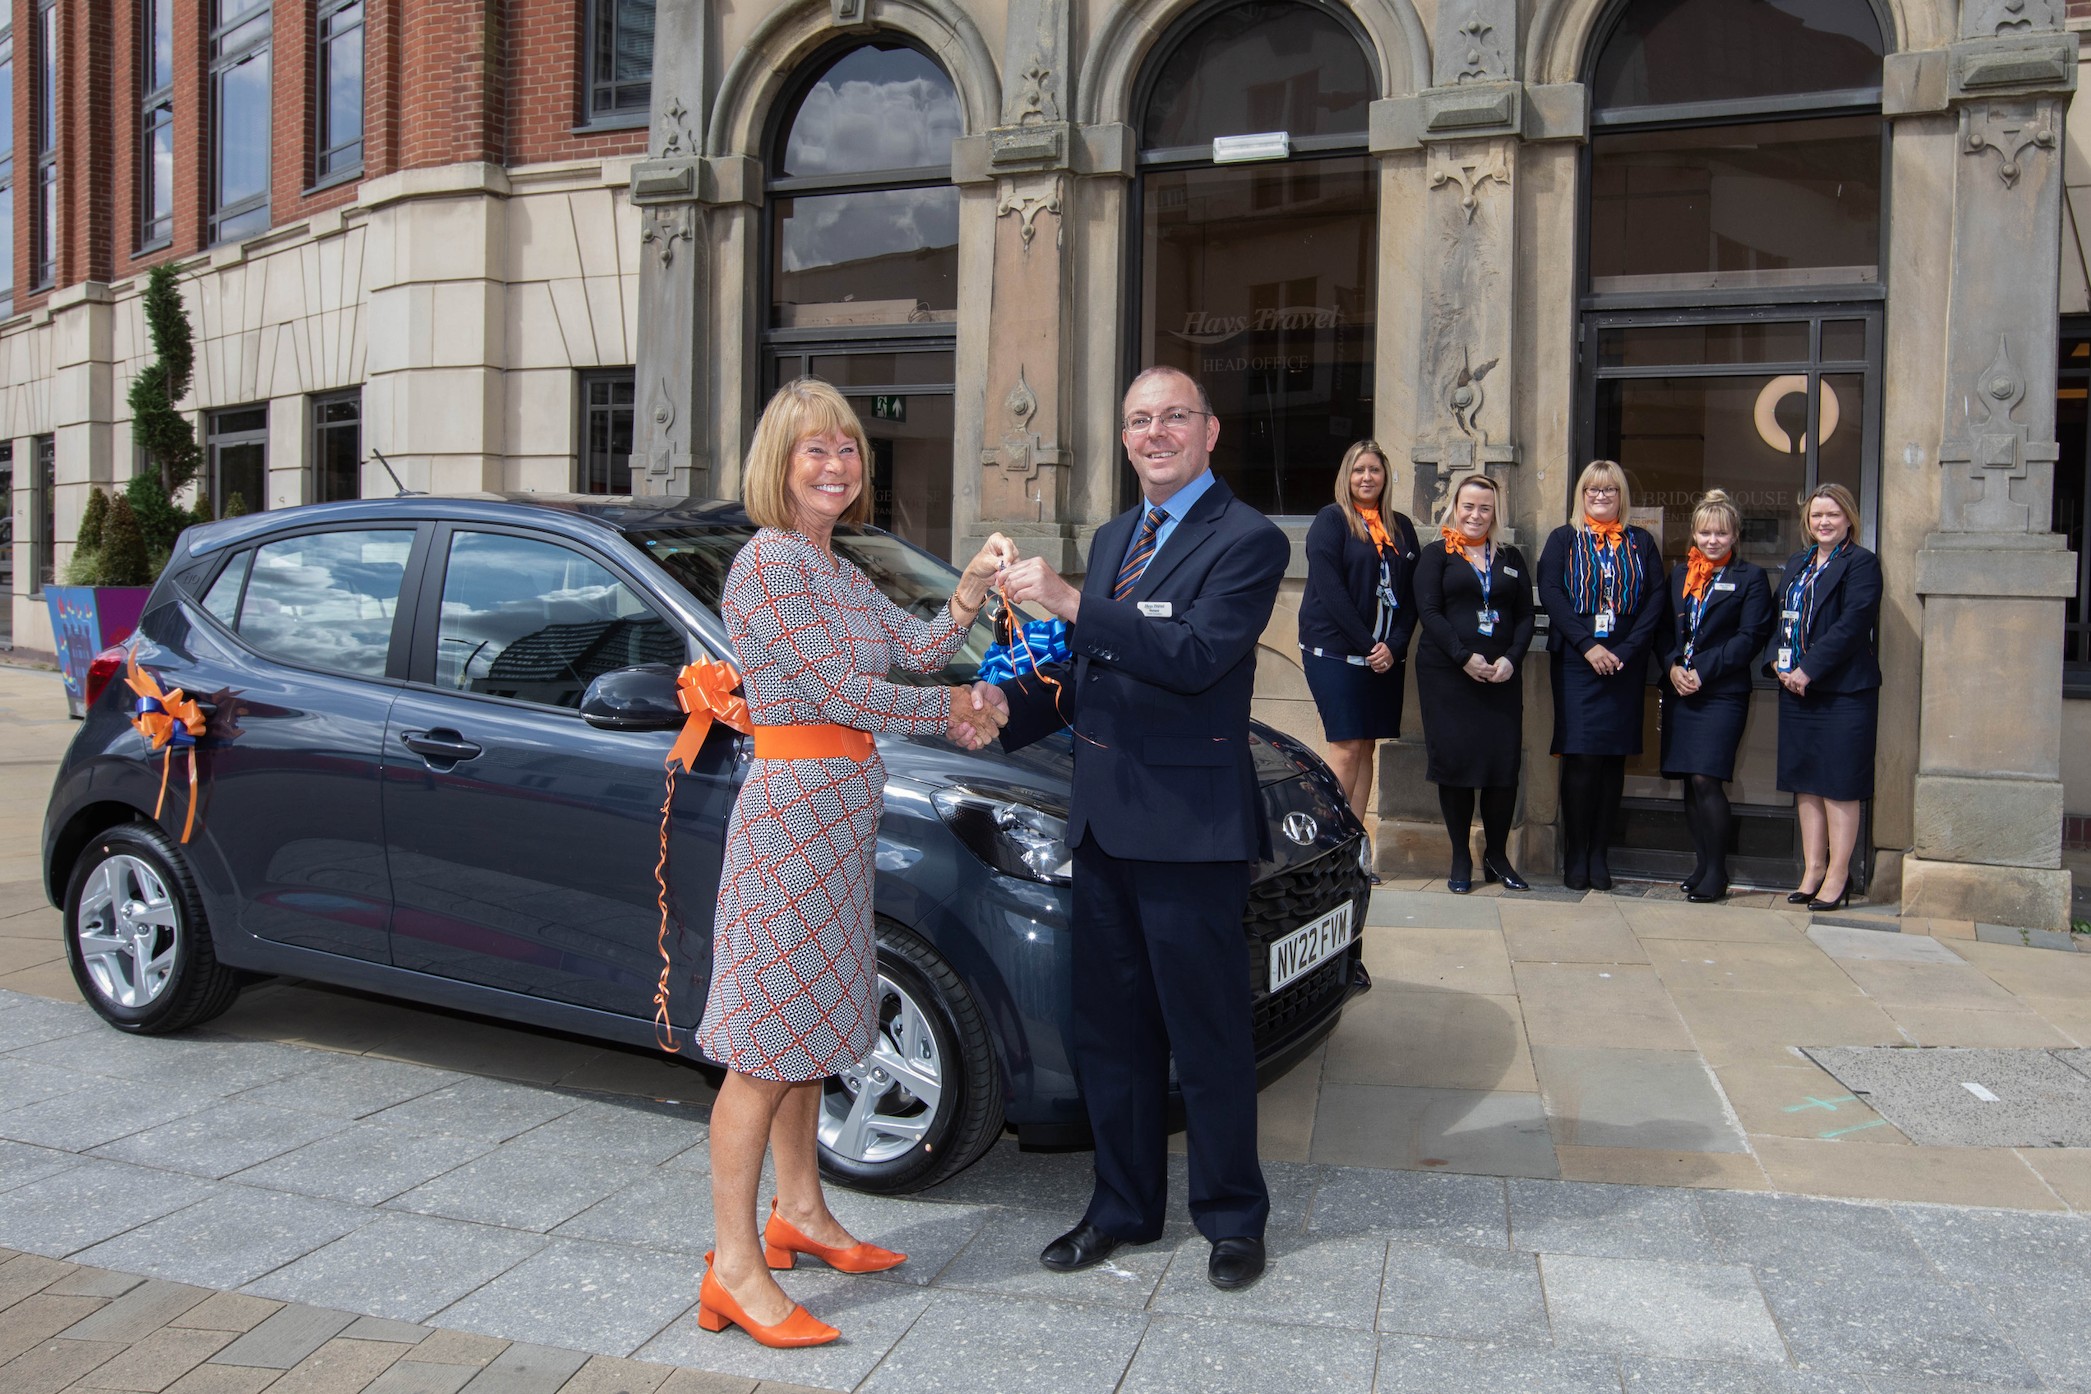 Hays agent 'shocked' after winning car in company prize scheme